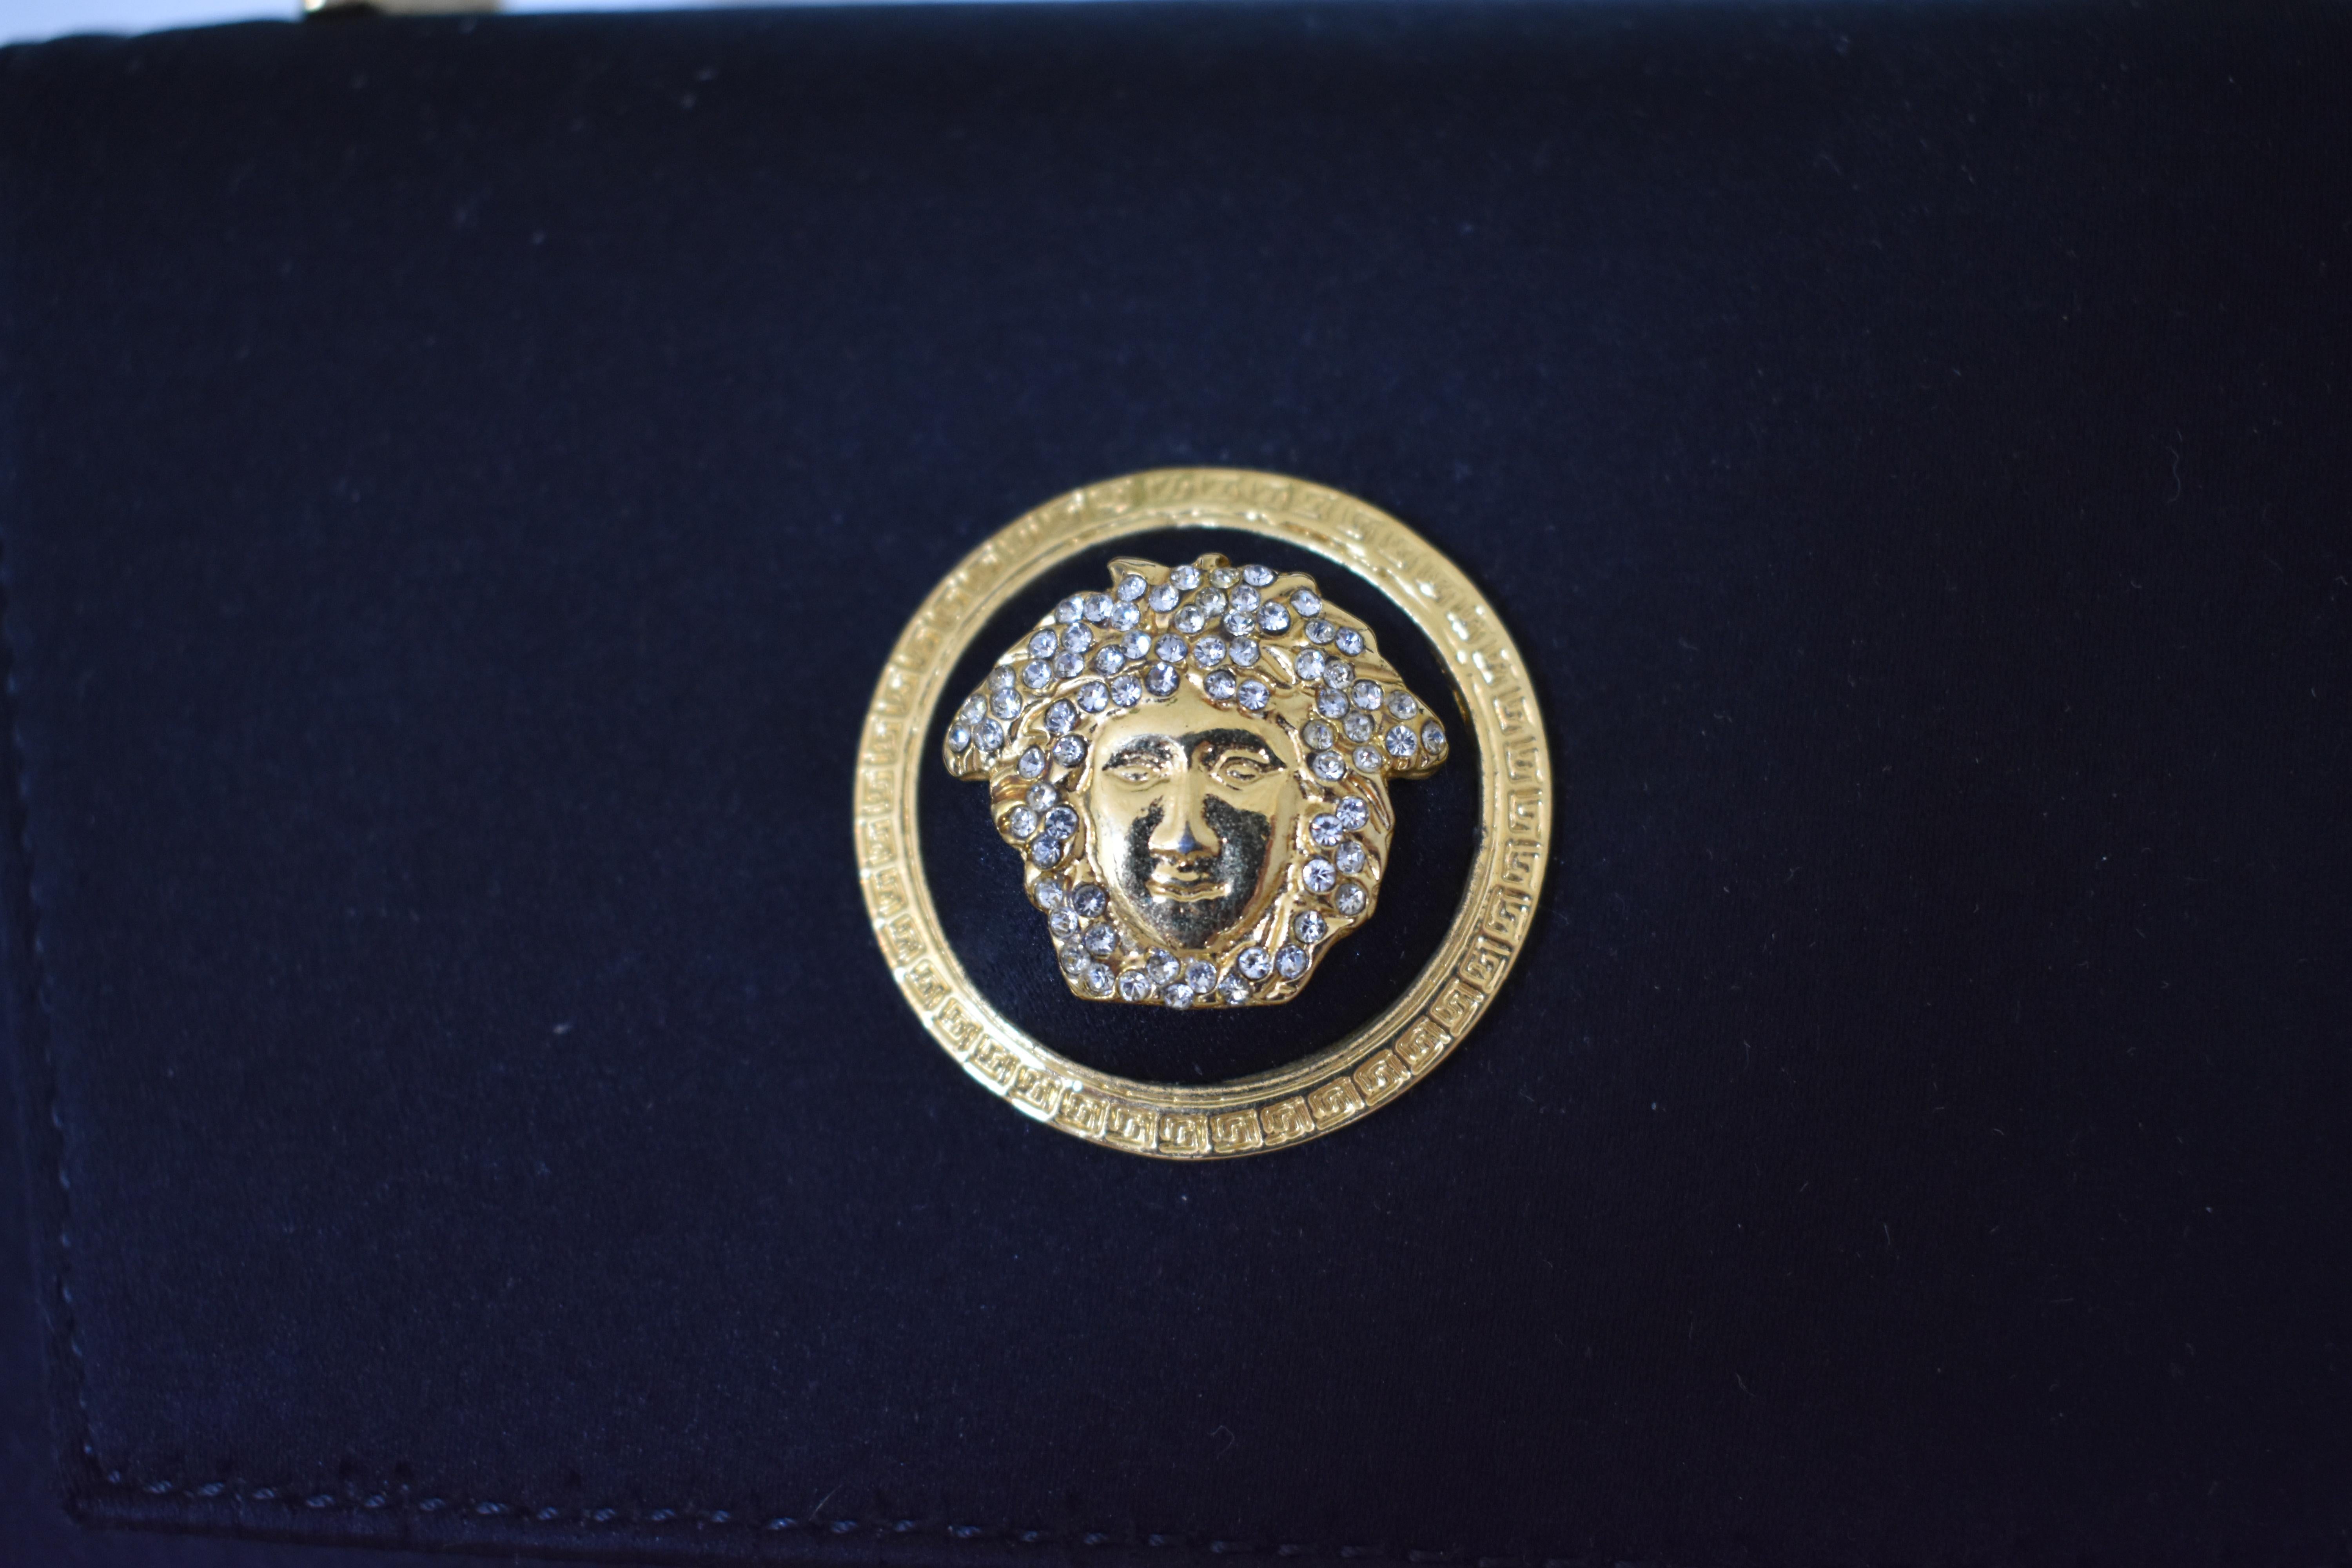 FINAL SALE Gianni Versace Couture Mini Satin Evening Bag with Medusa Head For Sale 3